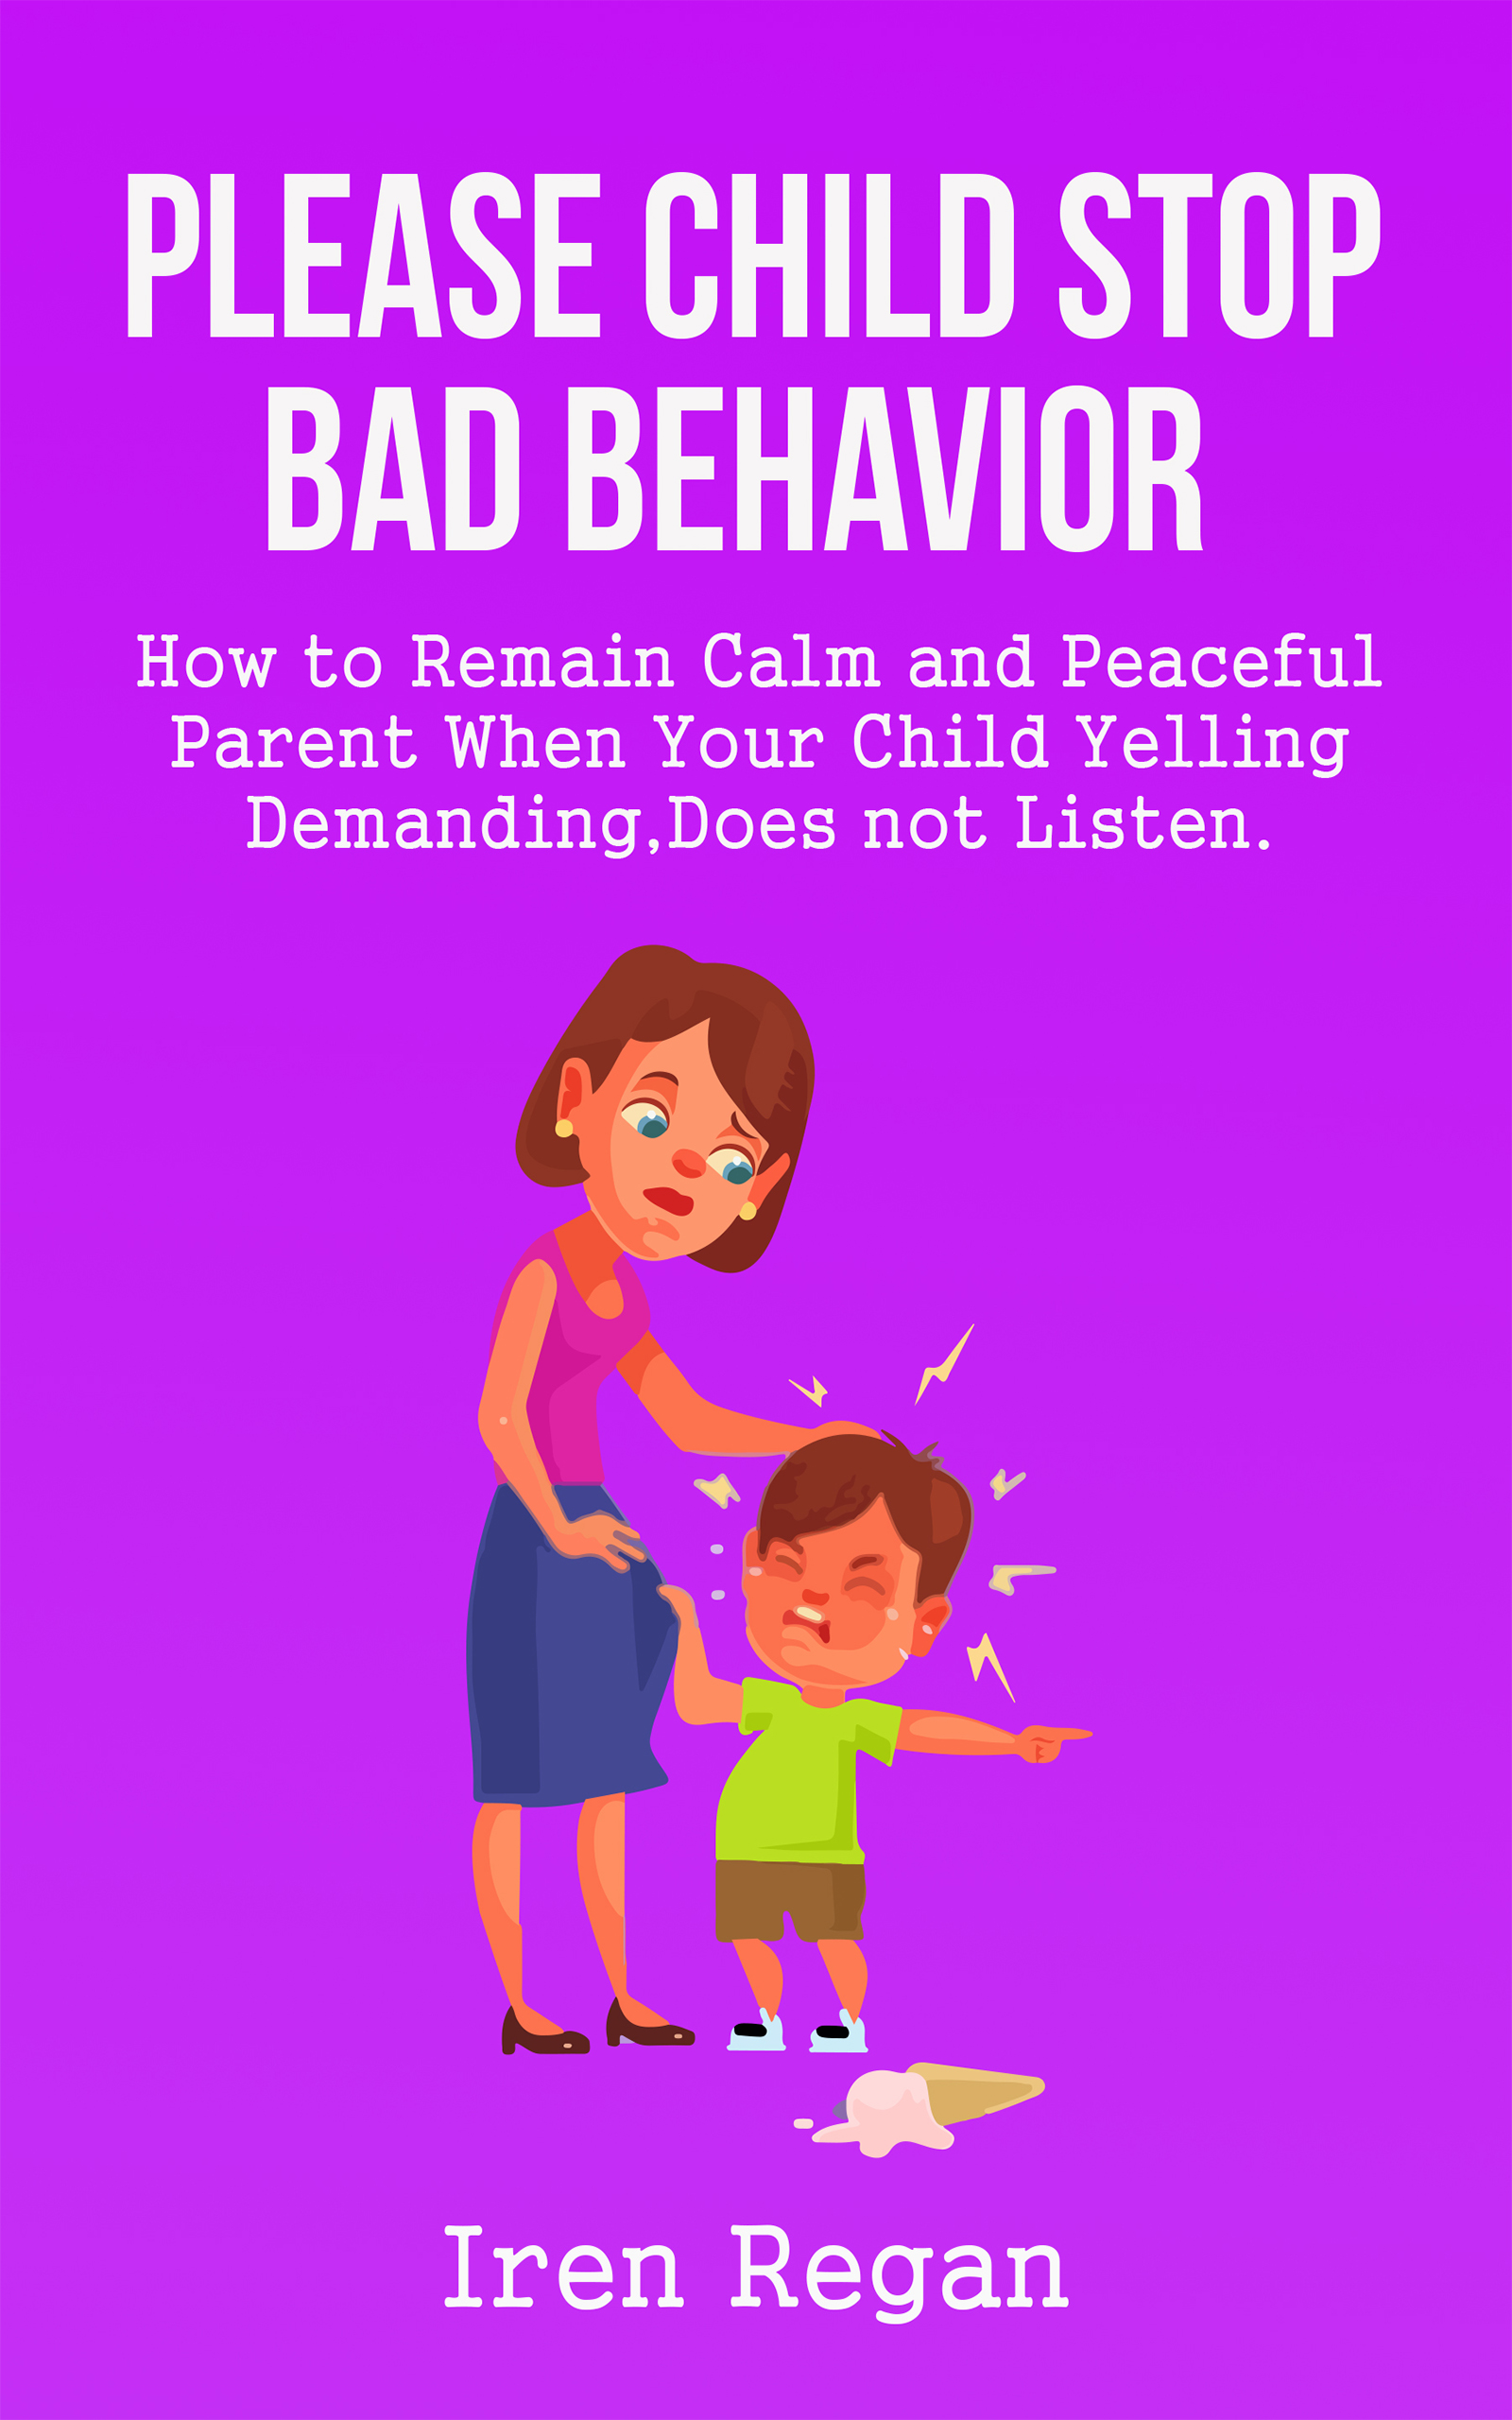 FREE: Please Child Stop Bad Behavior How to Remain Calm and Peaceful Parent: When Your Child Yelling, Demanding, Does Not listen.    by Iren Regan